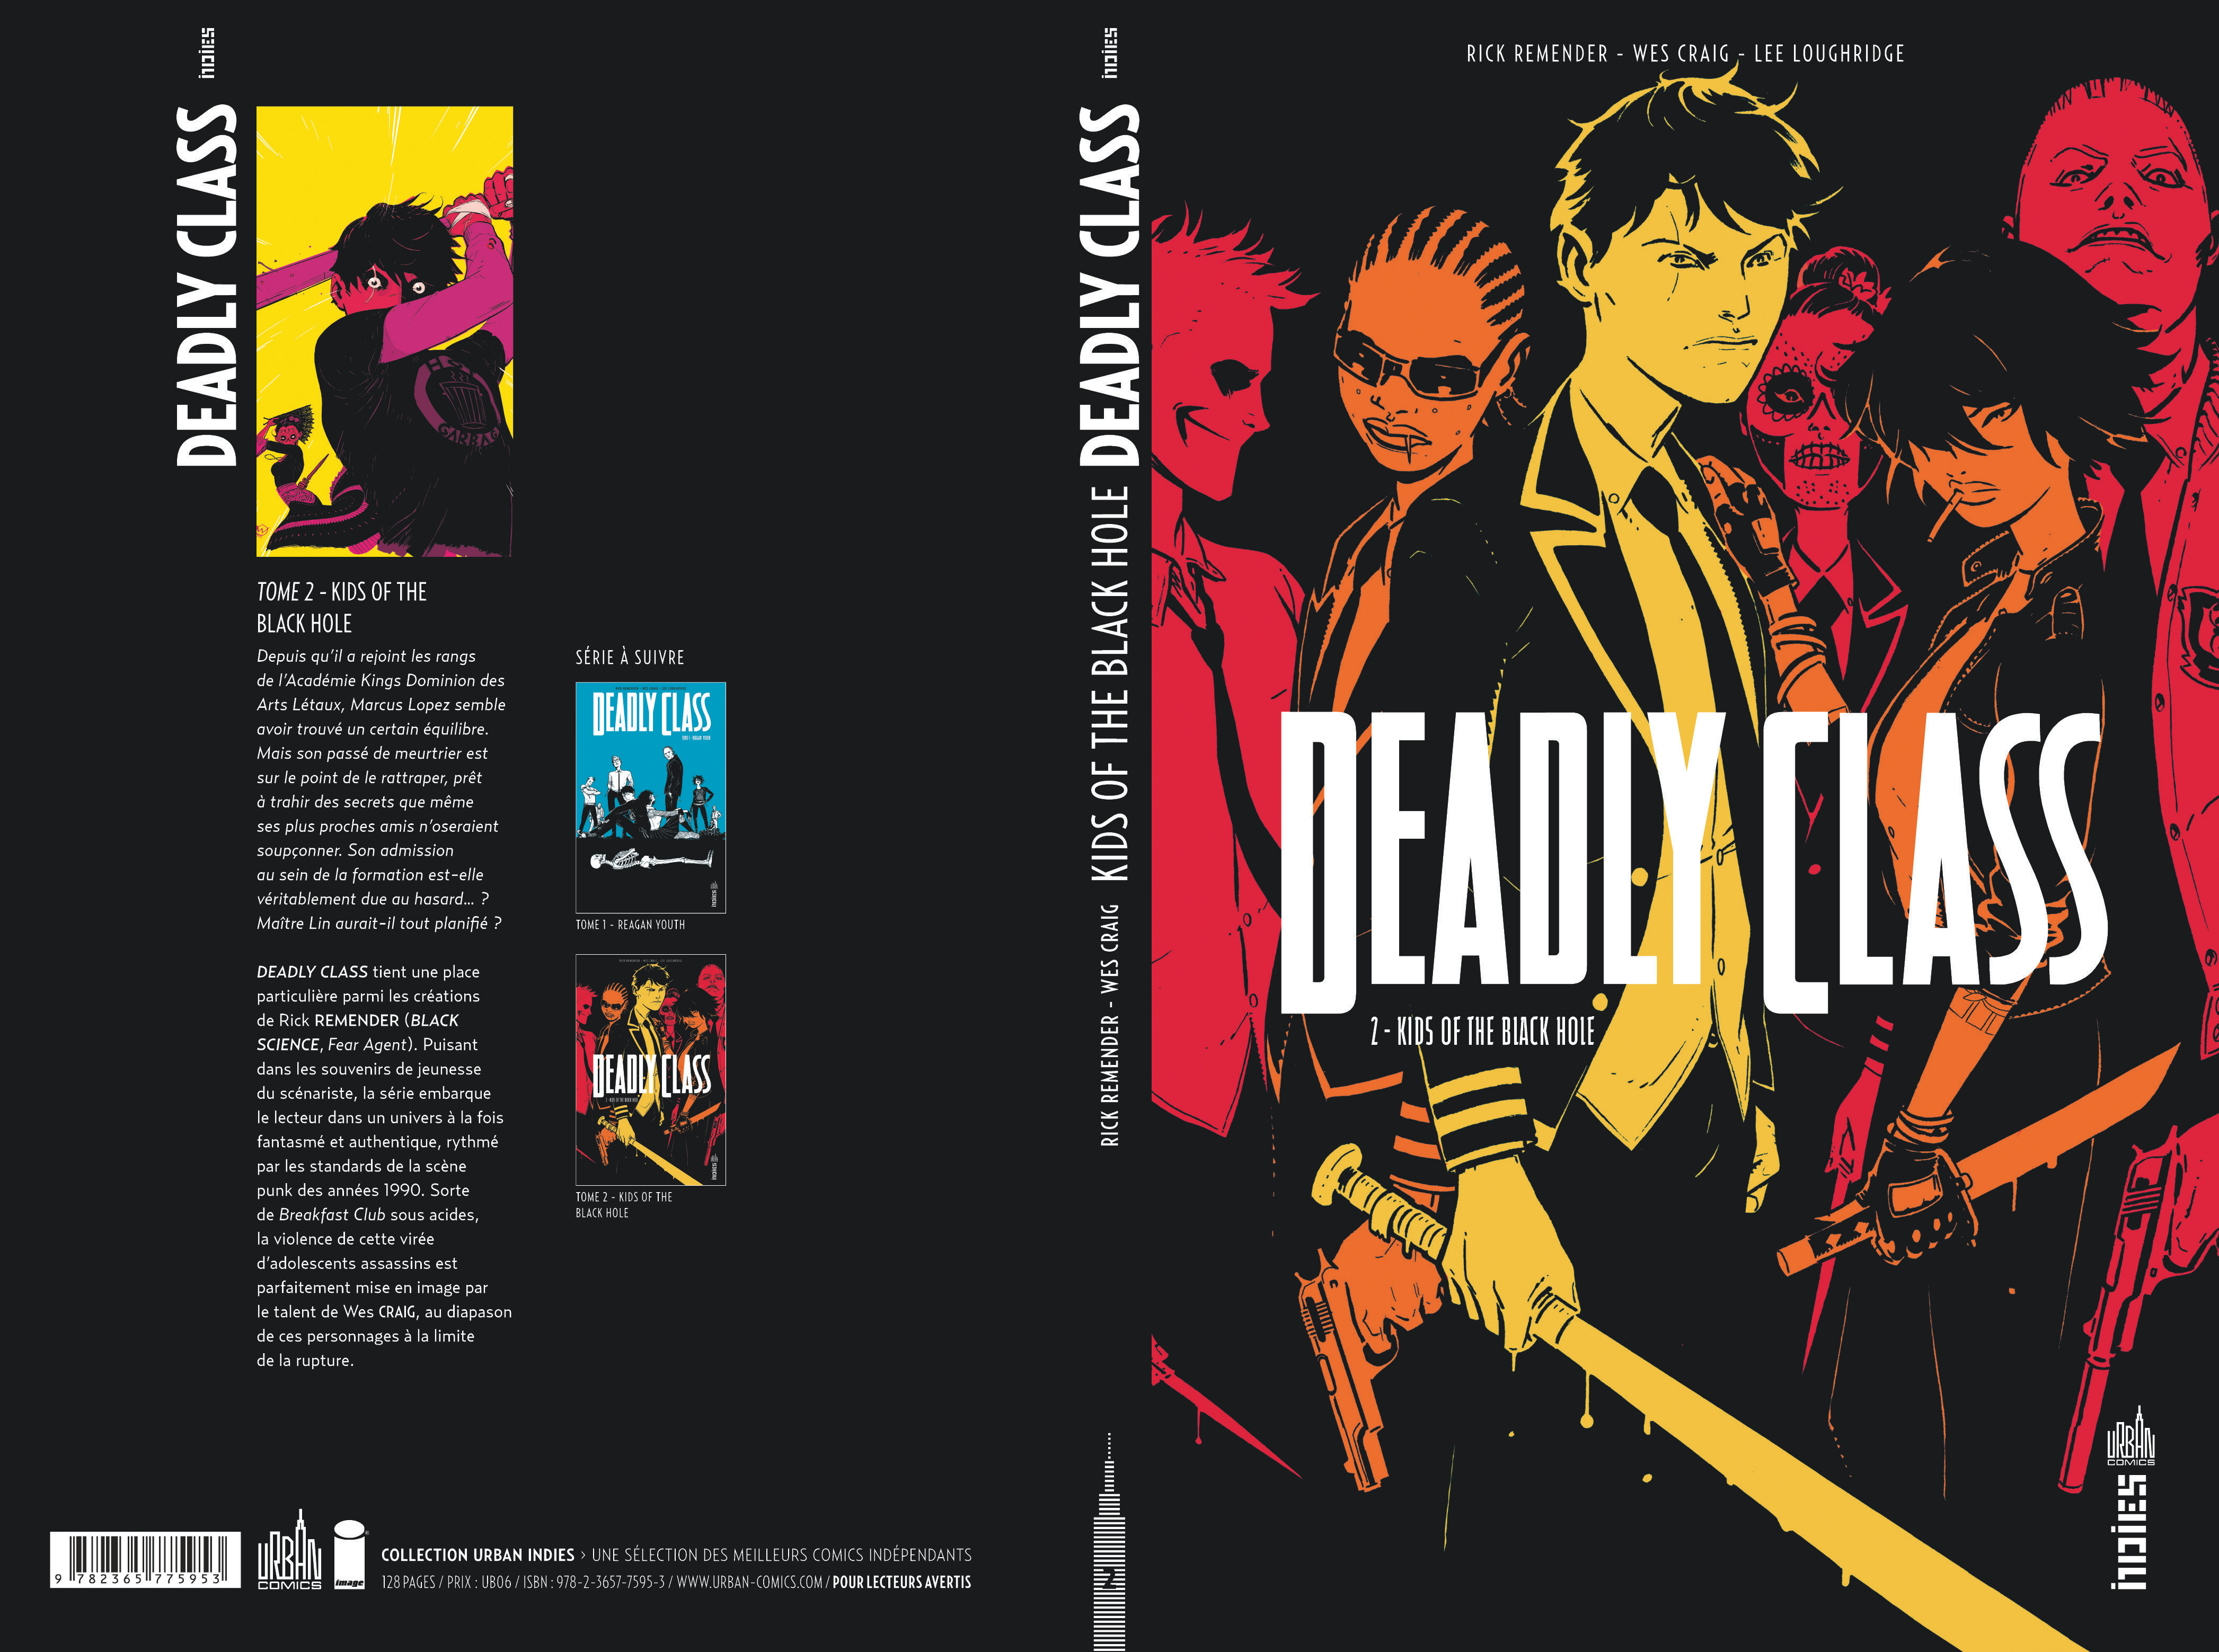 Deadly class – Tome 2 - 4eme